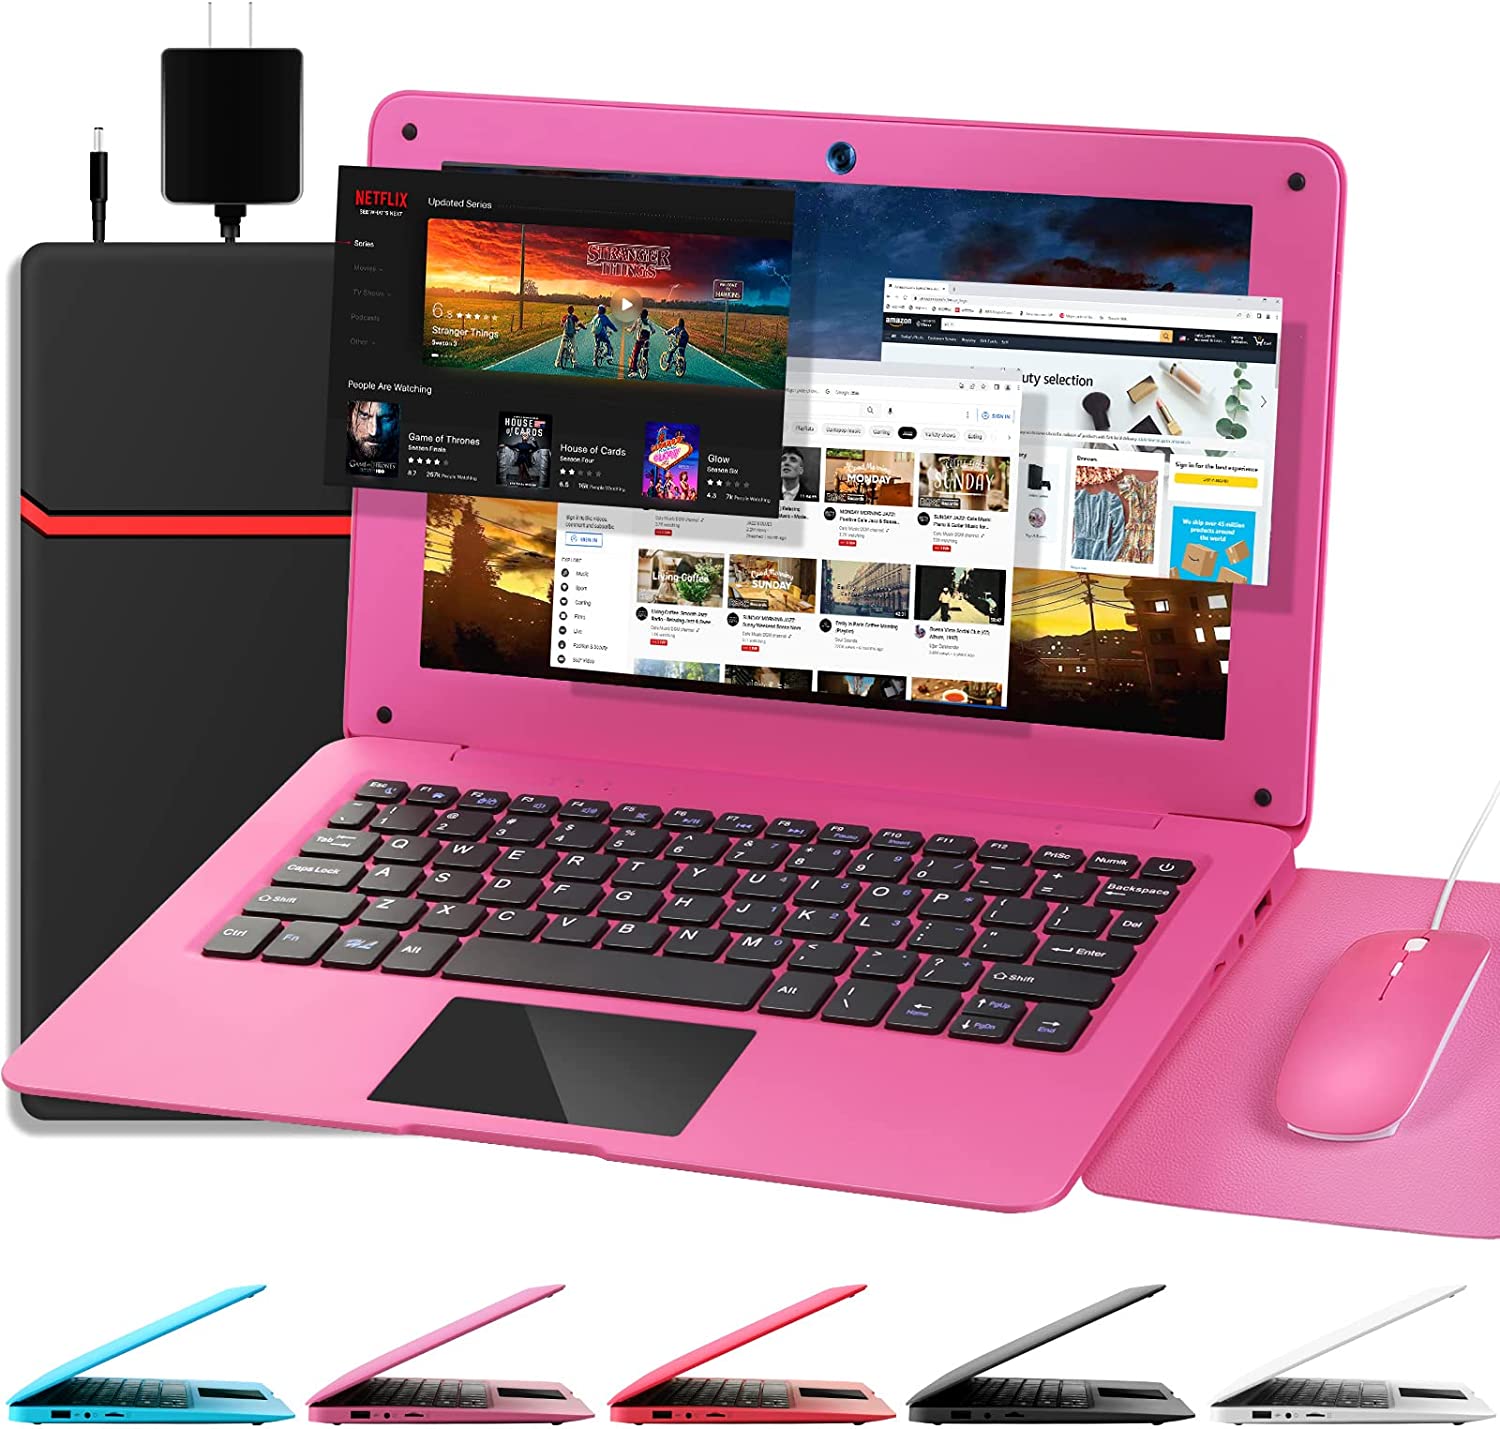 NBD Laptop Computer(10.1 inch), Quad Core Powered by Android 12.0, Netbook Computer with WiFi, Webcam and Bluetooth, Mini Laptop with Bag, Mouse, and Mouse Pad for Kids and Adults（Pink）